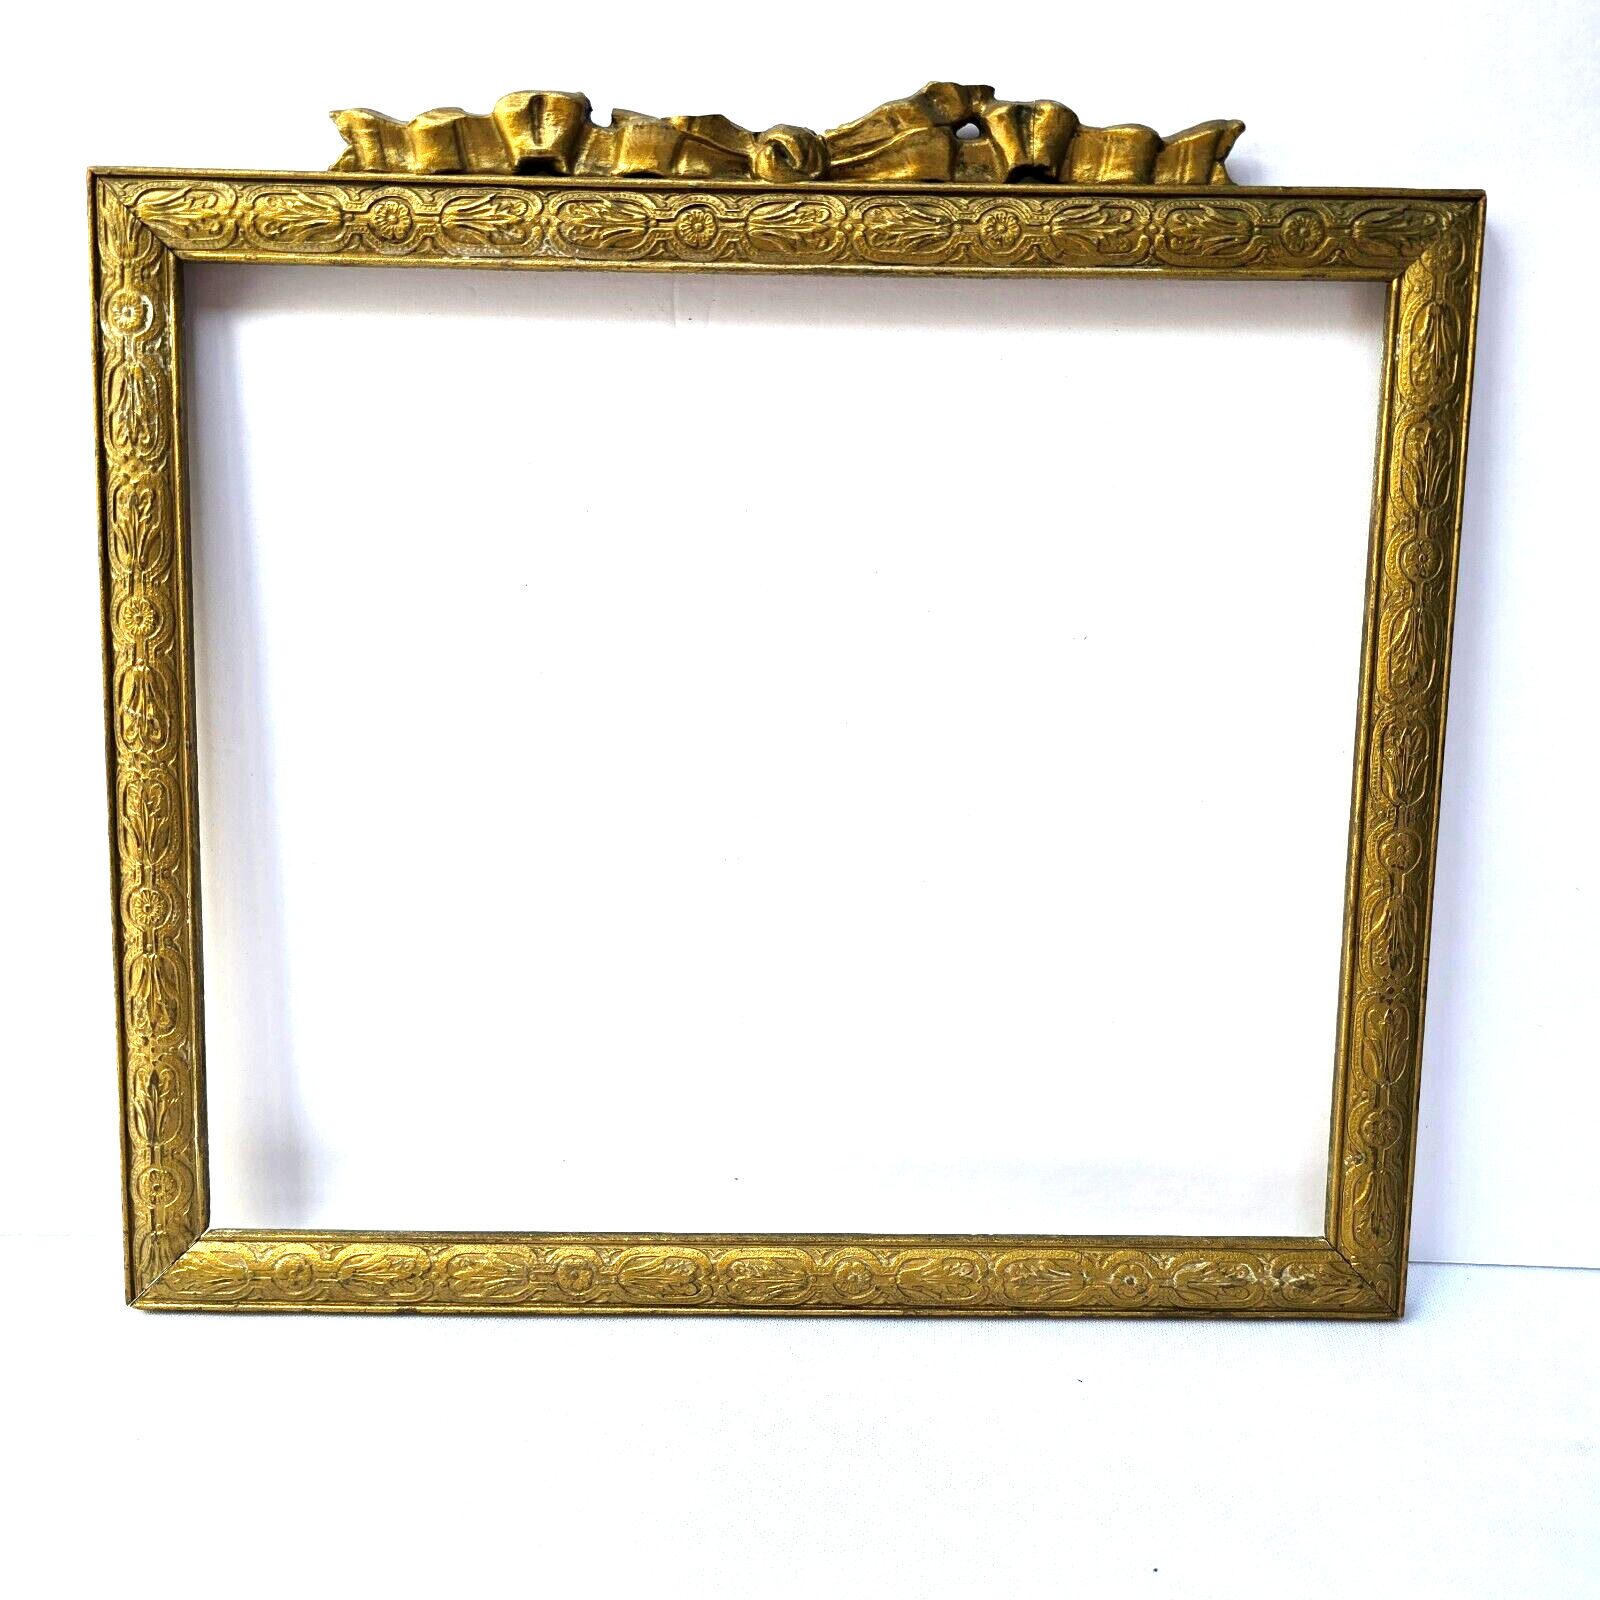 Antique 1920s Ornate Gold Carved Wood & Gesso Picture Frame w/Bow 12 x 10 in Vtg